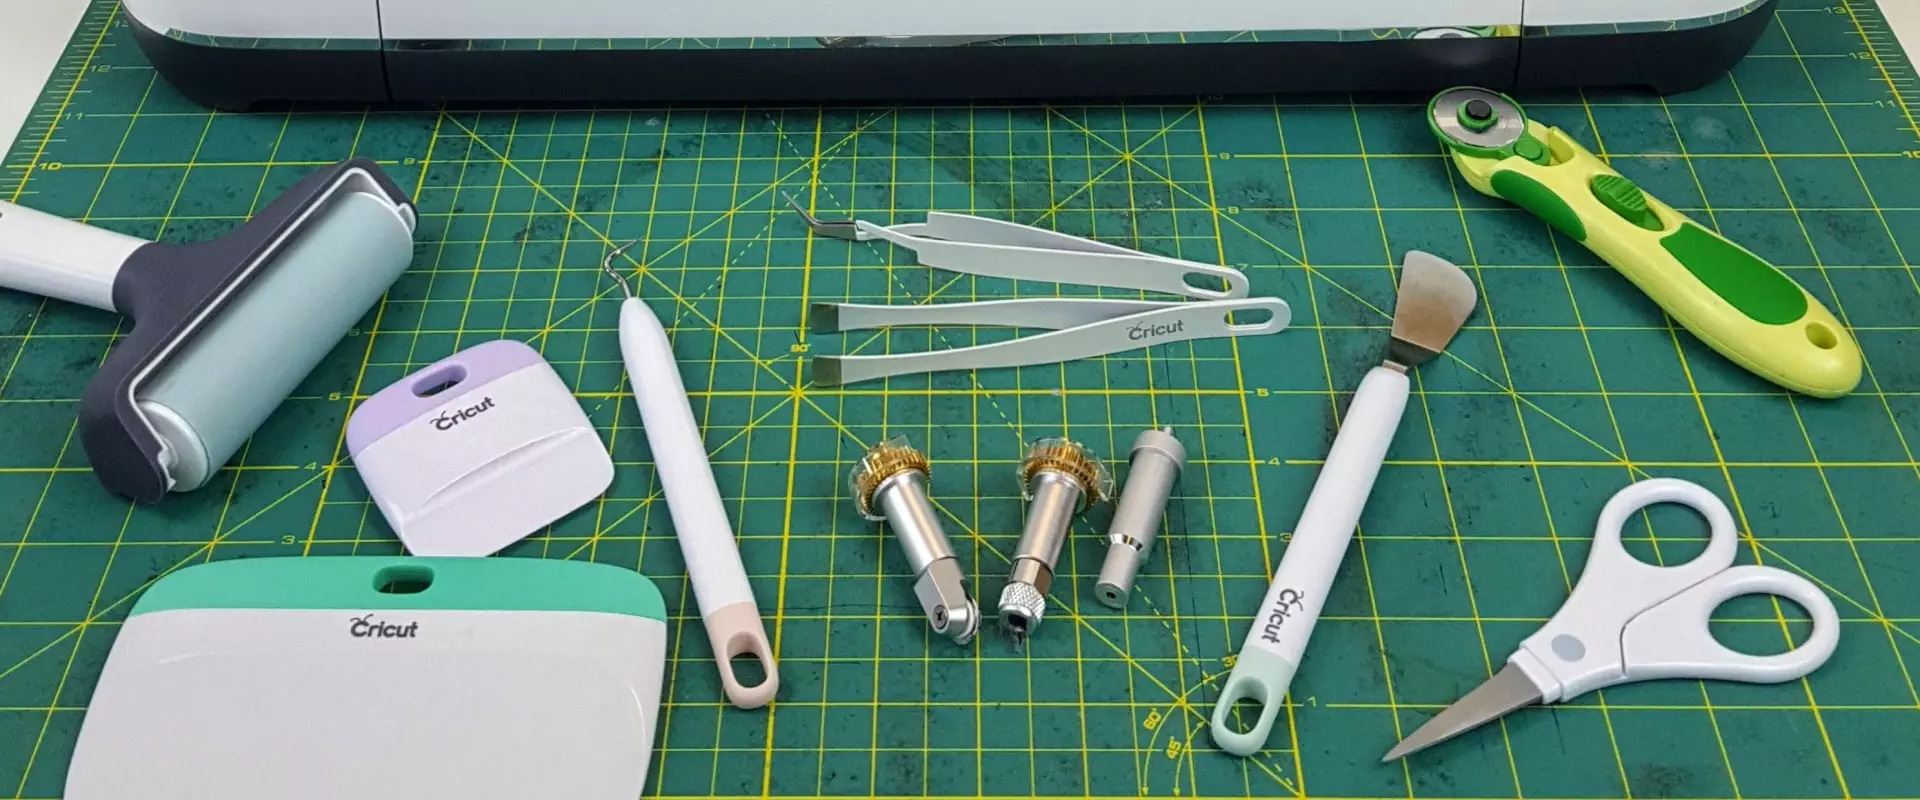 What exactly does a cricut do?